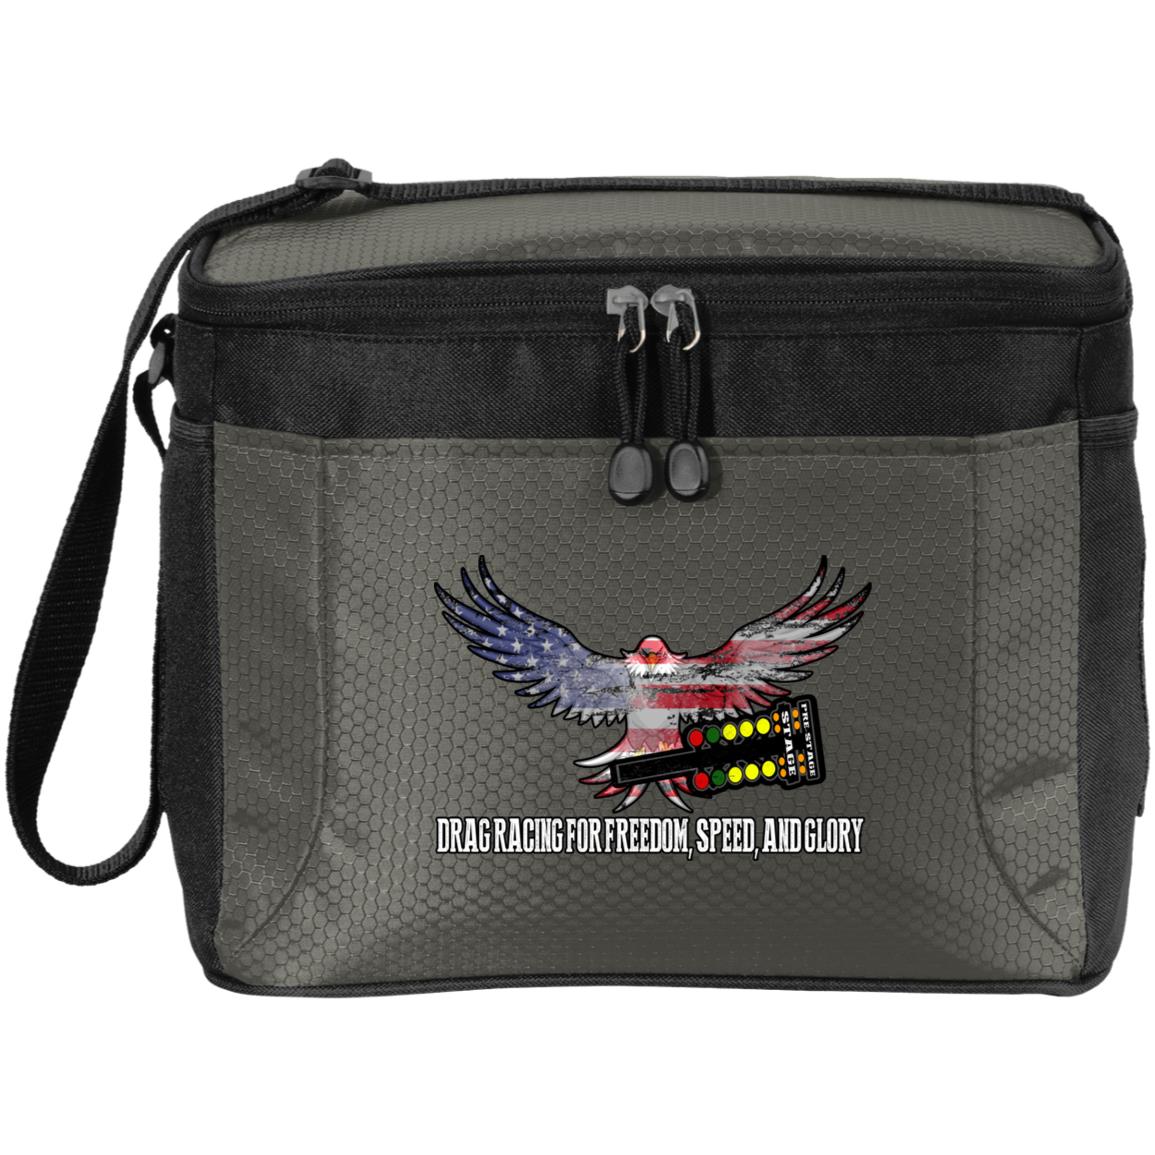 Drag Racing for Freedom, Speed, and Glory 12-Pack Cooler